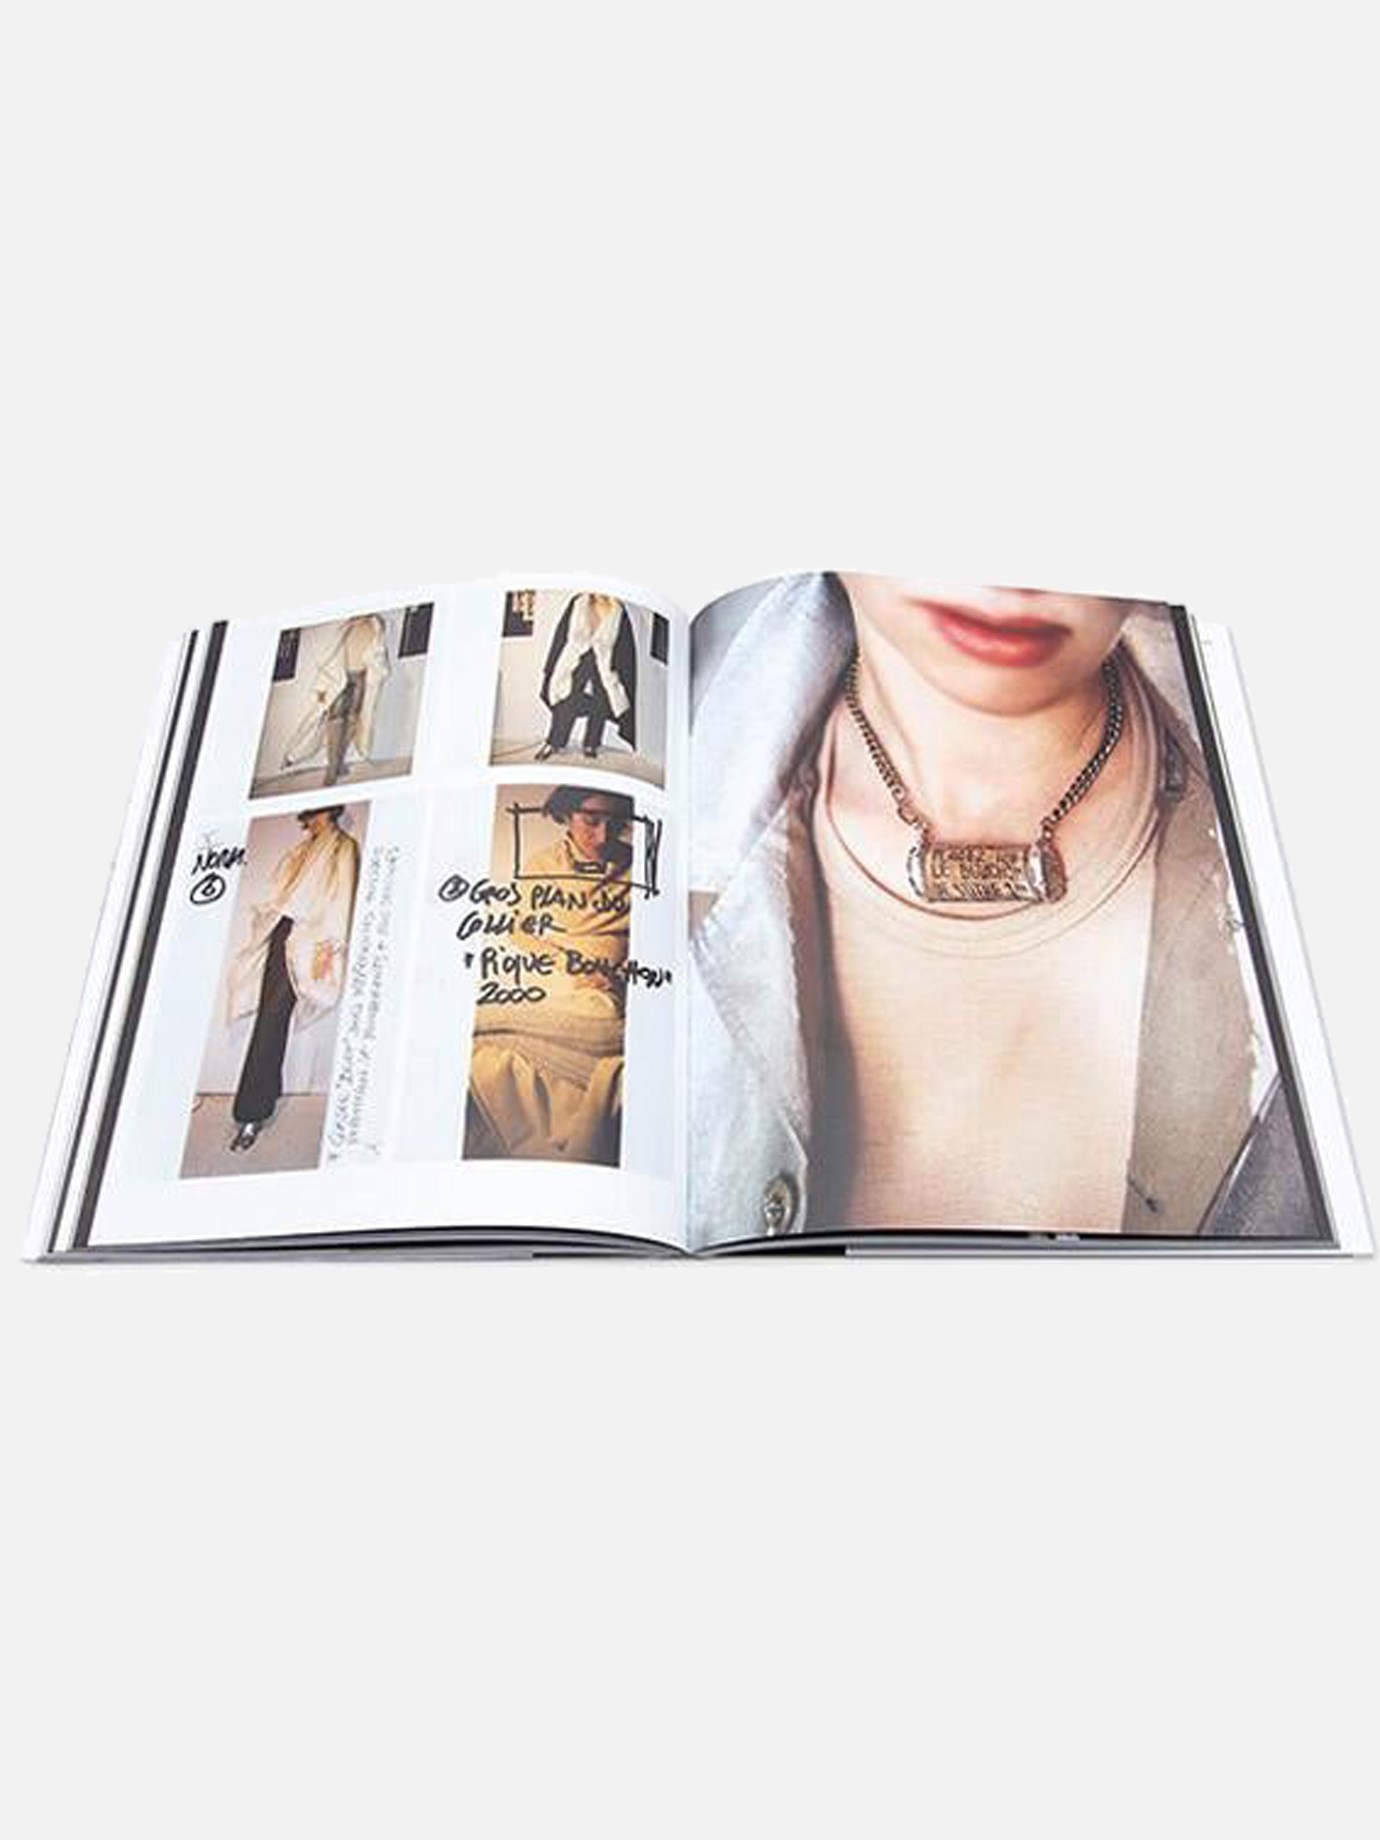 Rizzoli Martin Margiela  The Women's Collections  by Rizzoli